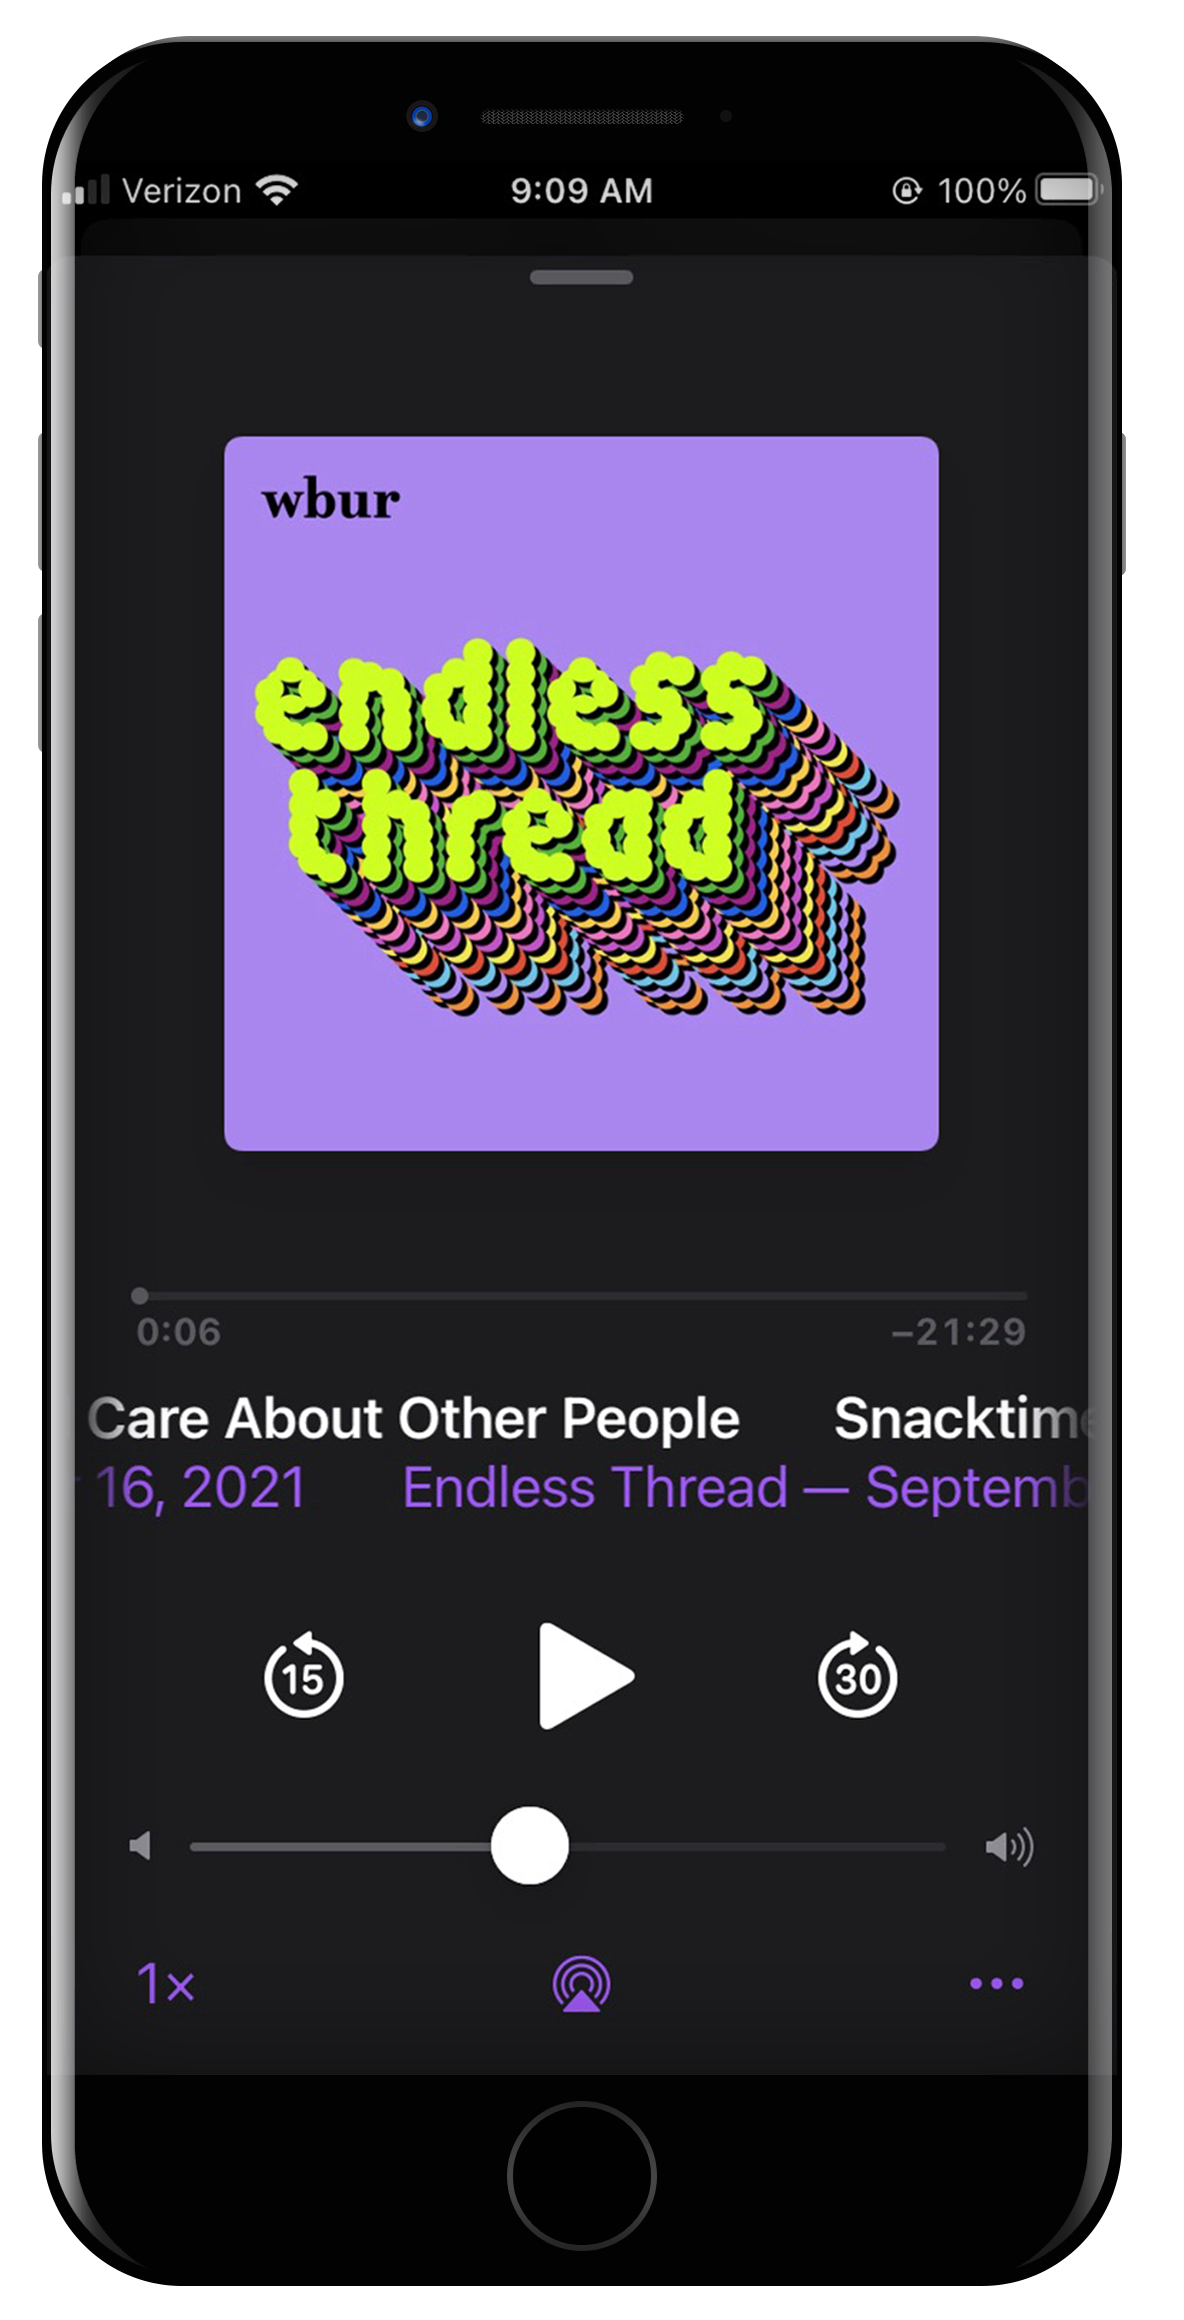 endless thread podcast cover on a black iphone